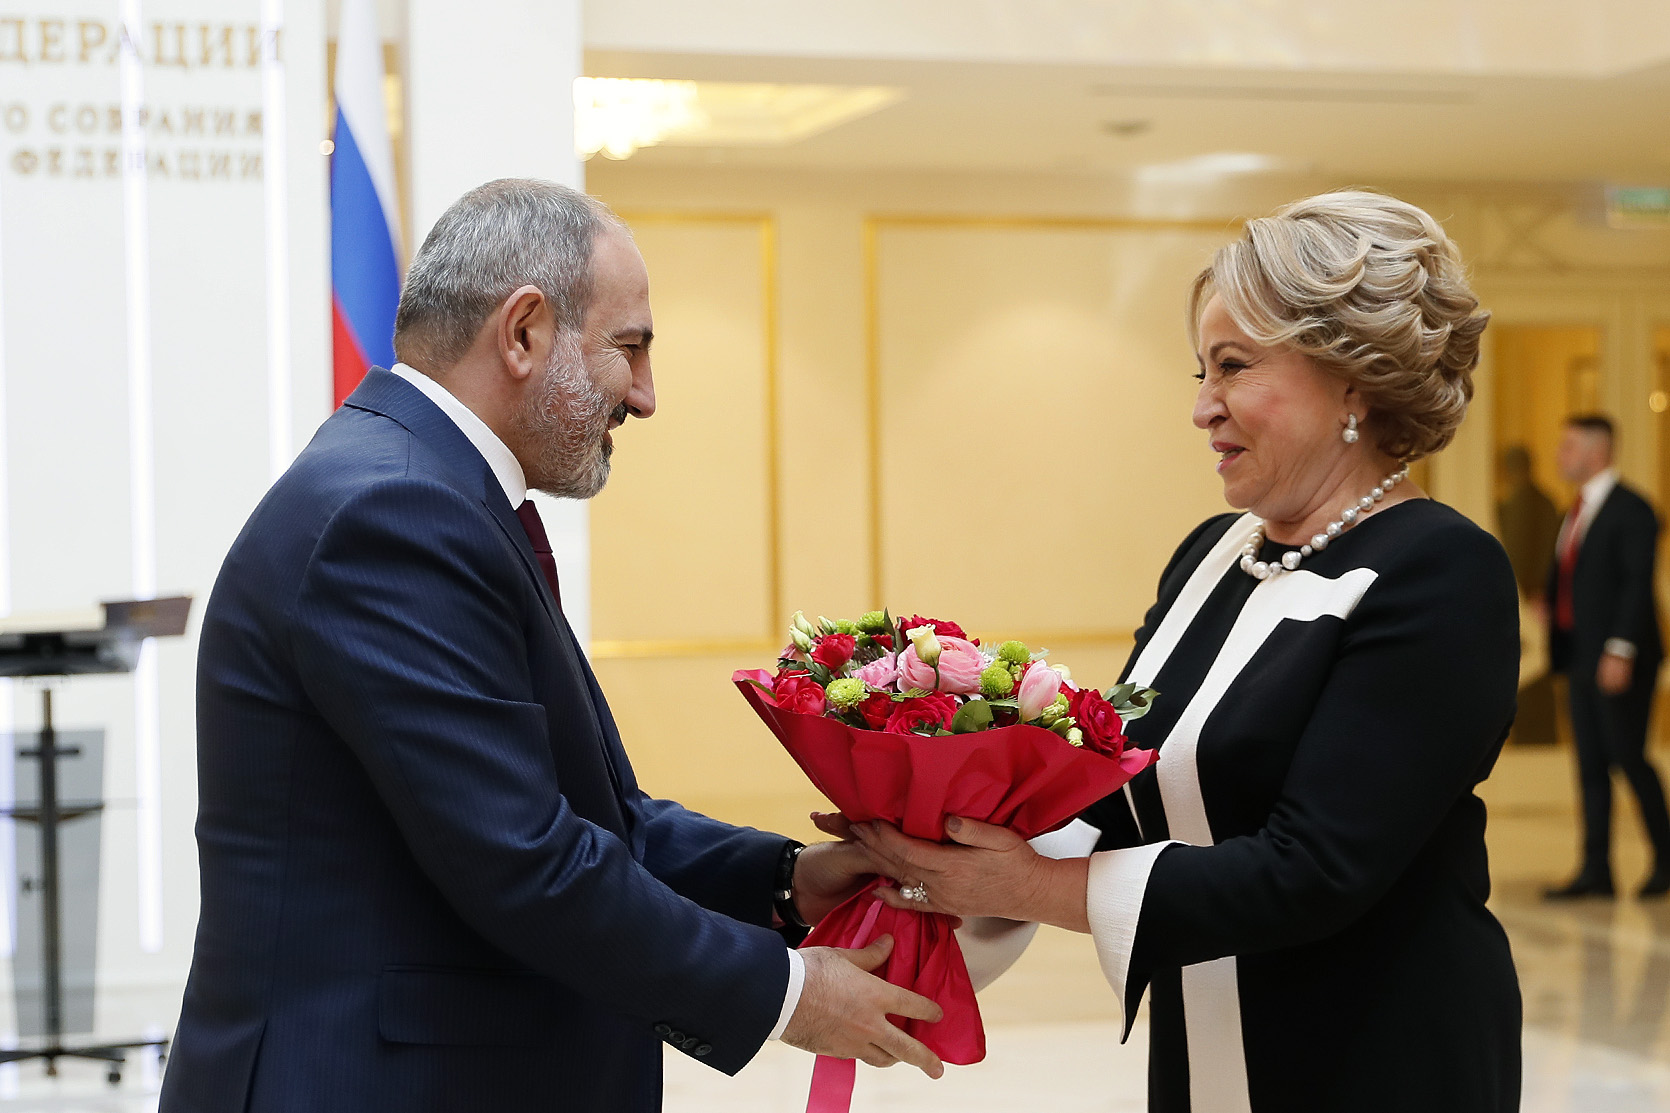 Pashinyan again commits to deeper Russia cooperation in high-level Moscow meetings